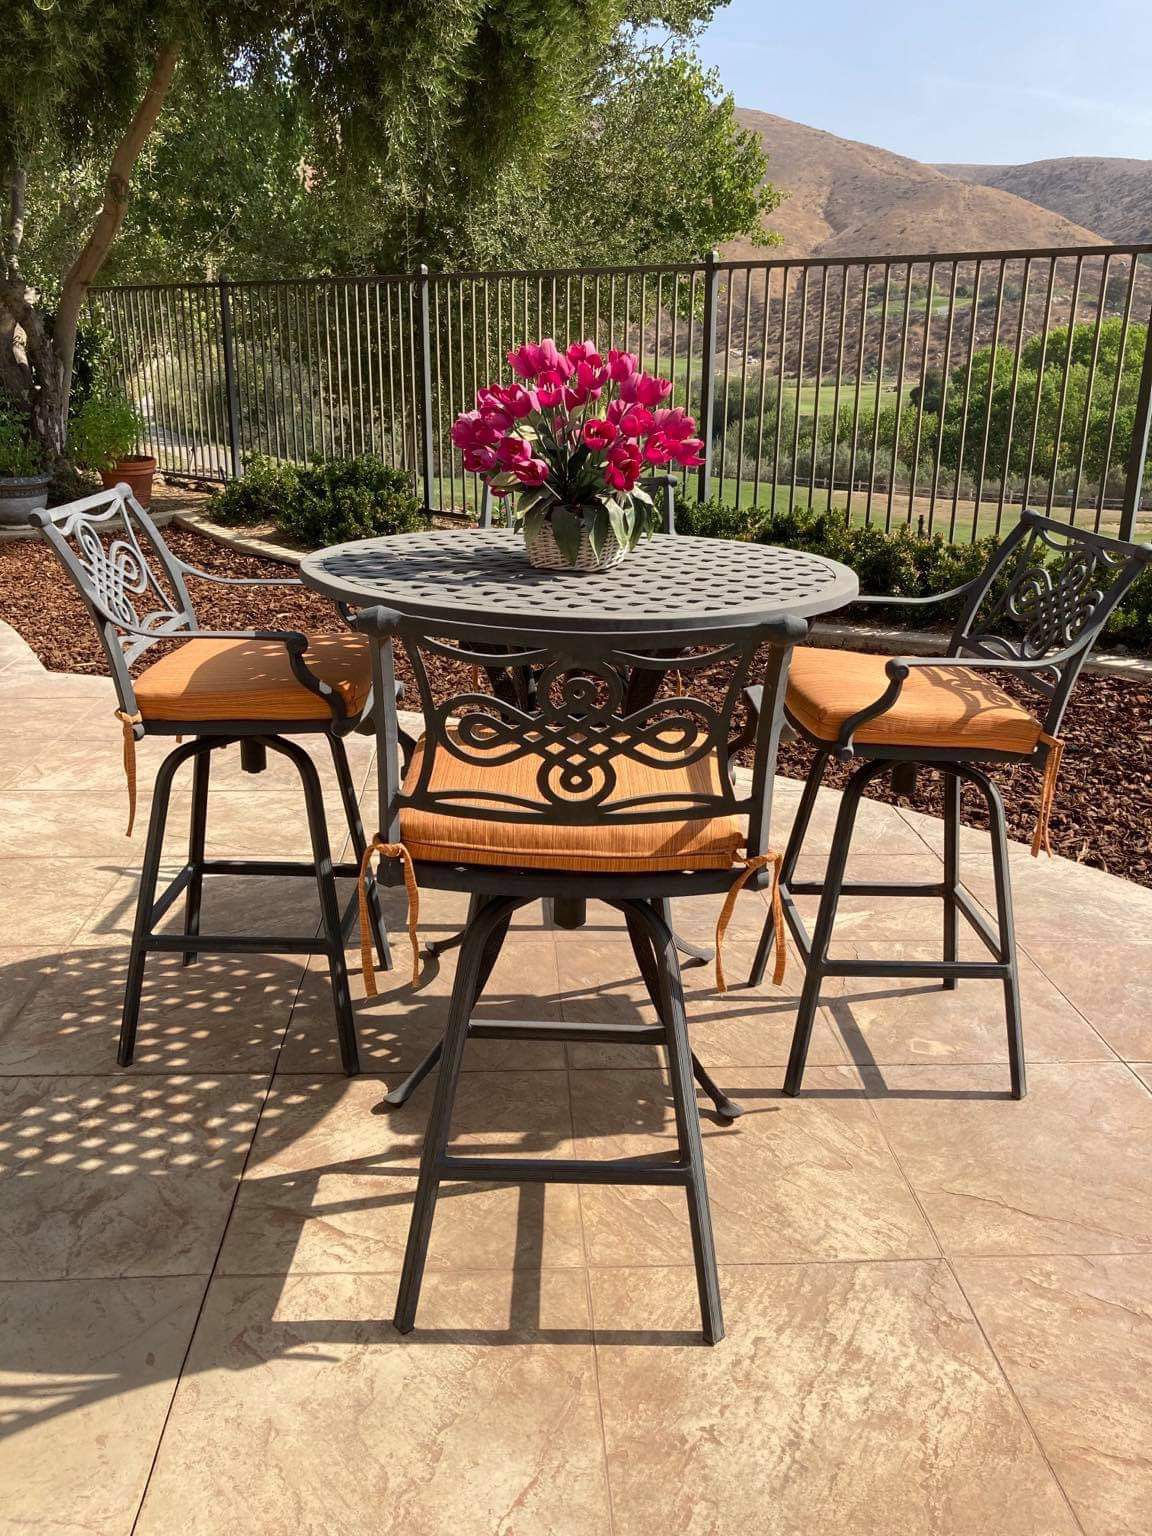 Wrought Iron Bar Height Table With 4 Swivel Chairs & 4 SunBrella Cushions.  PENDING SALE